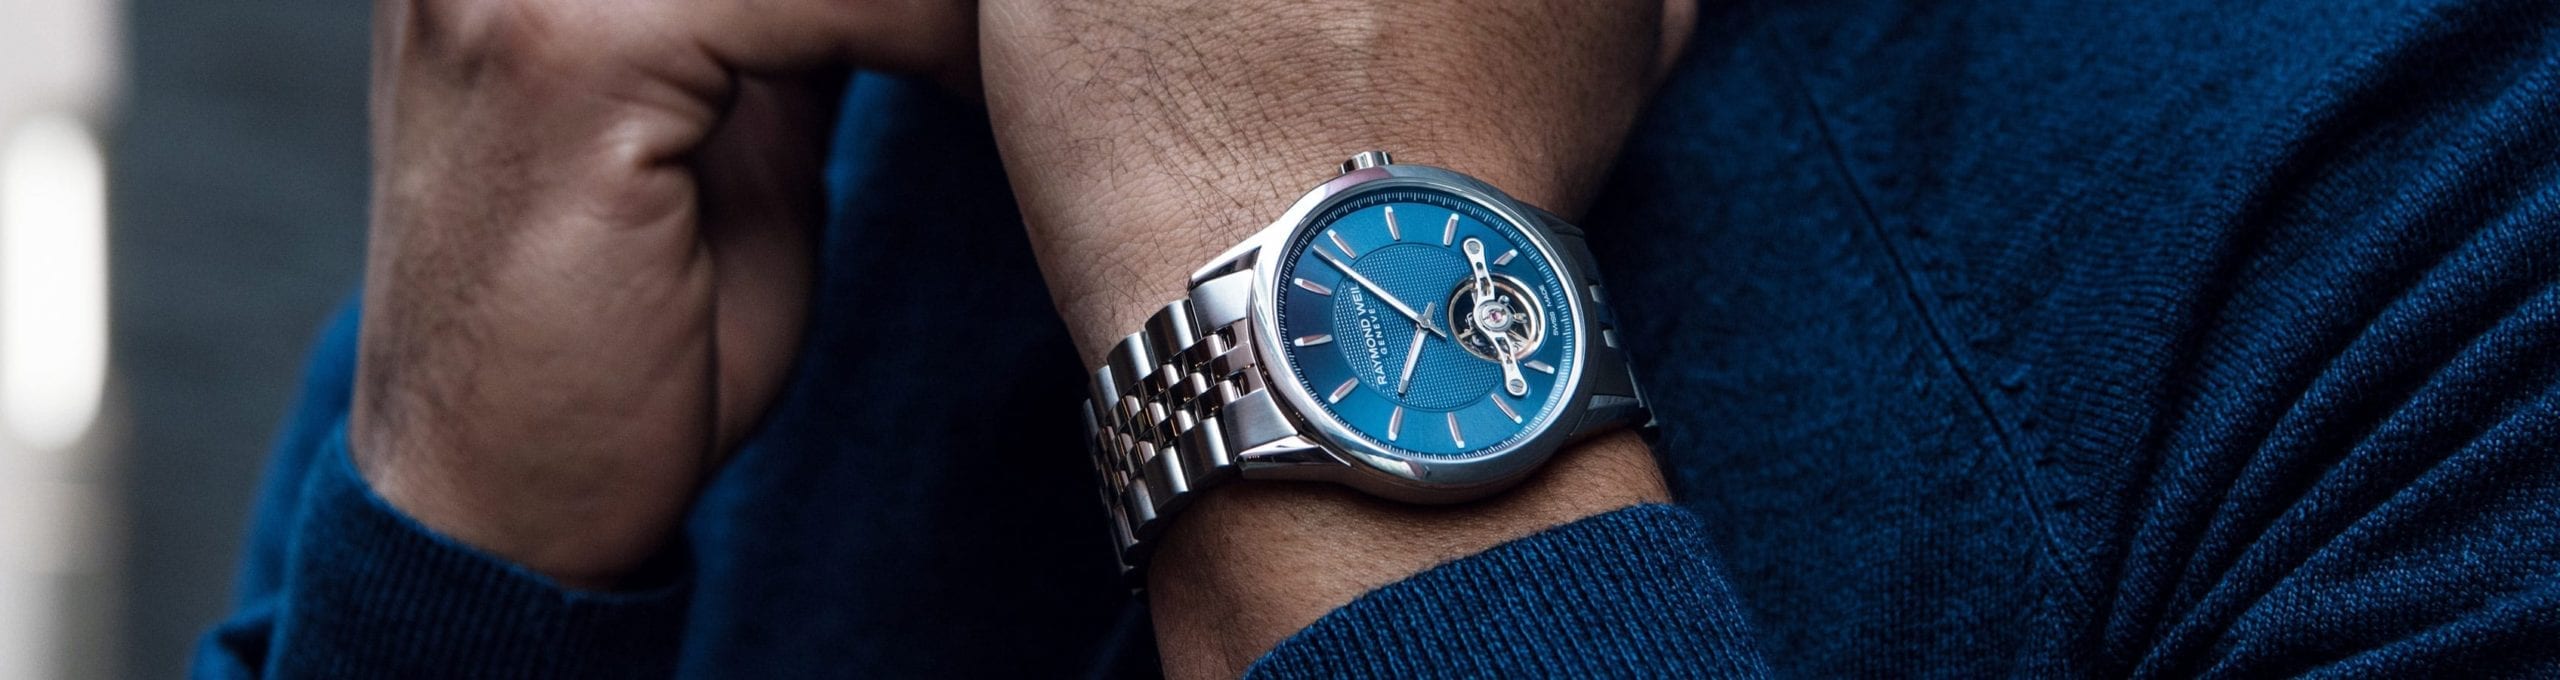 RAYMOND WEIL Blue Men's Freelancer Automatic Watch with a Visible Balance Wheel.